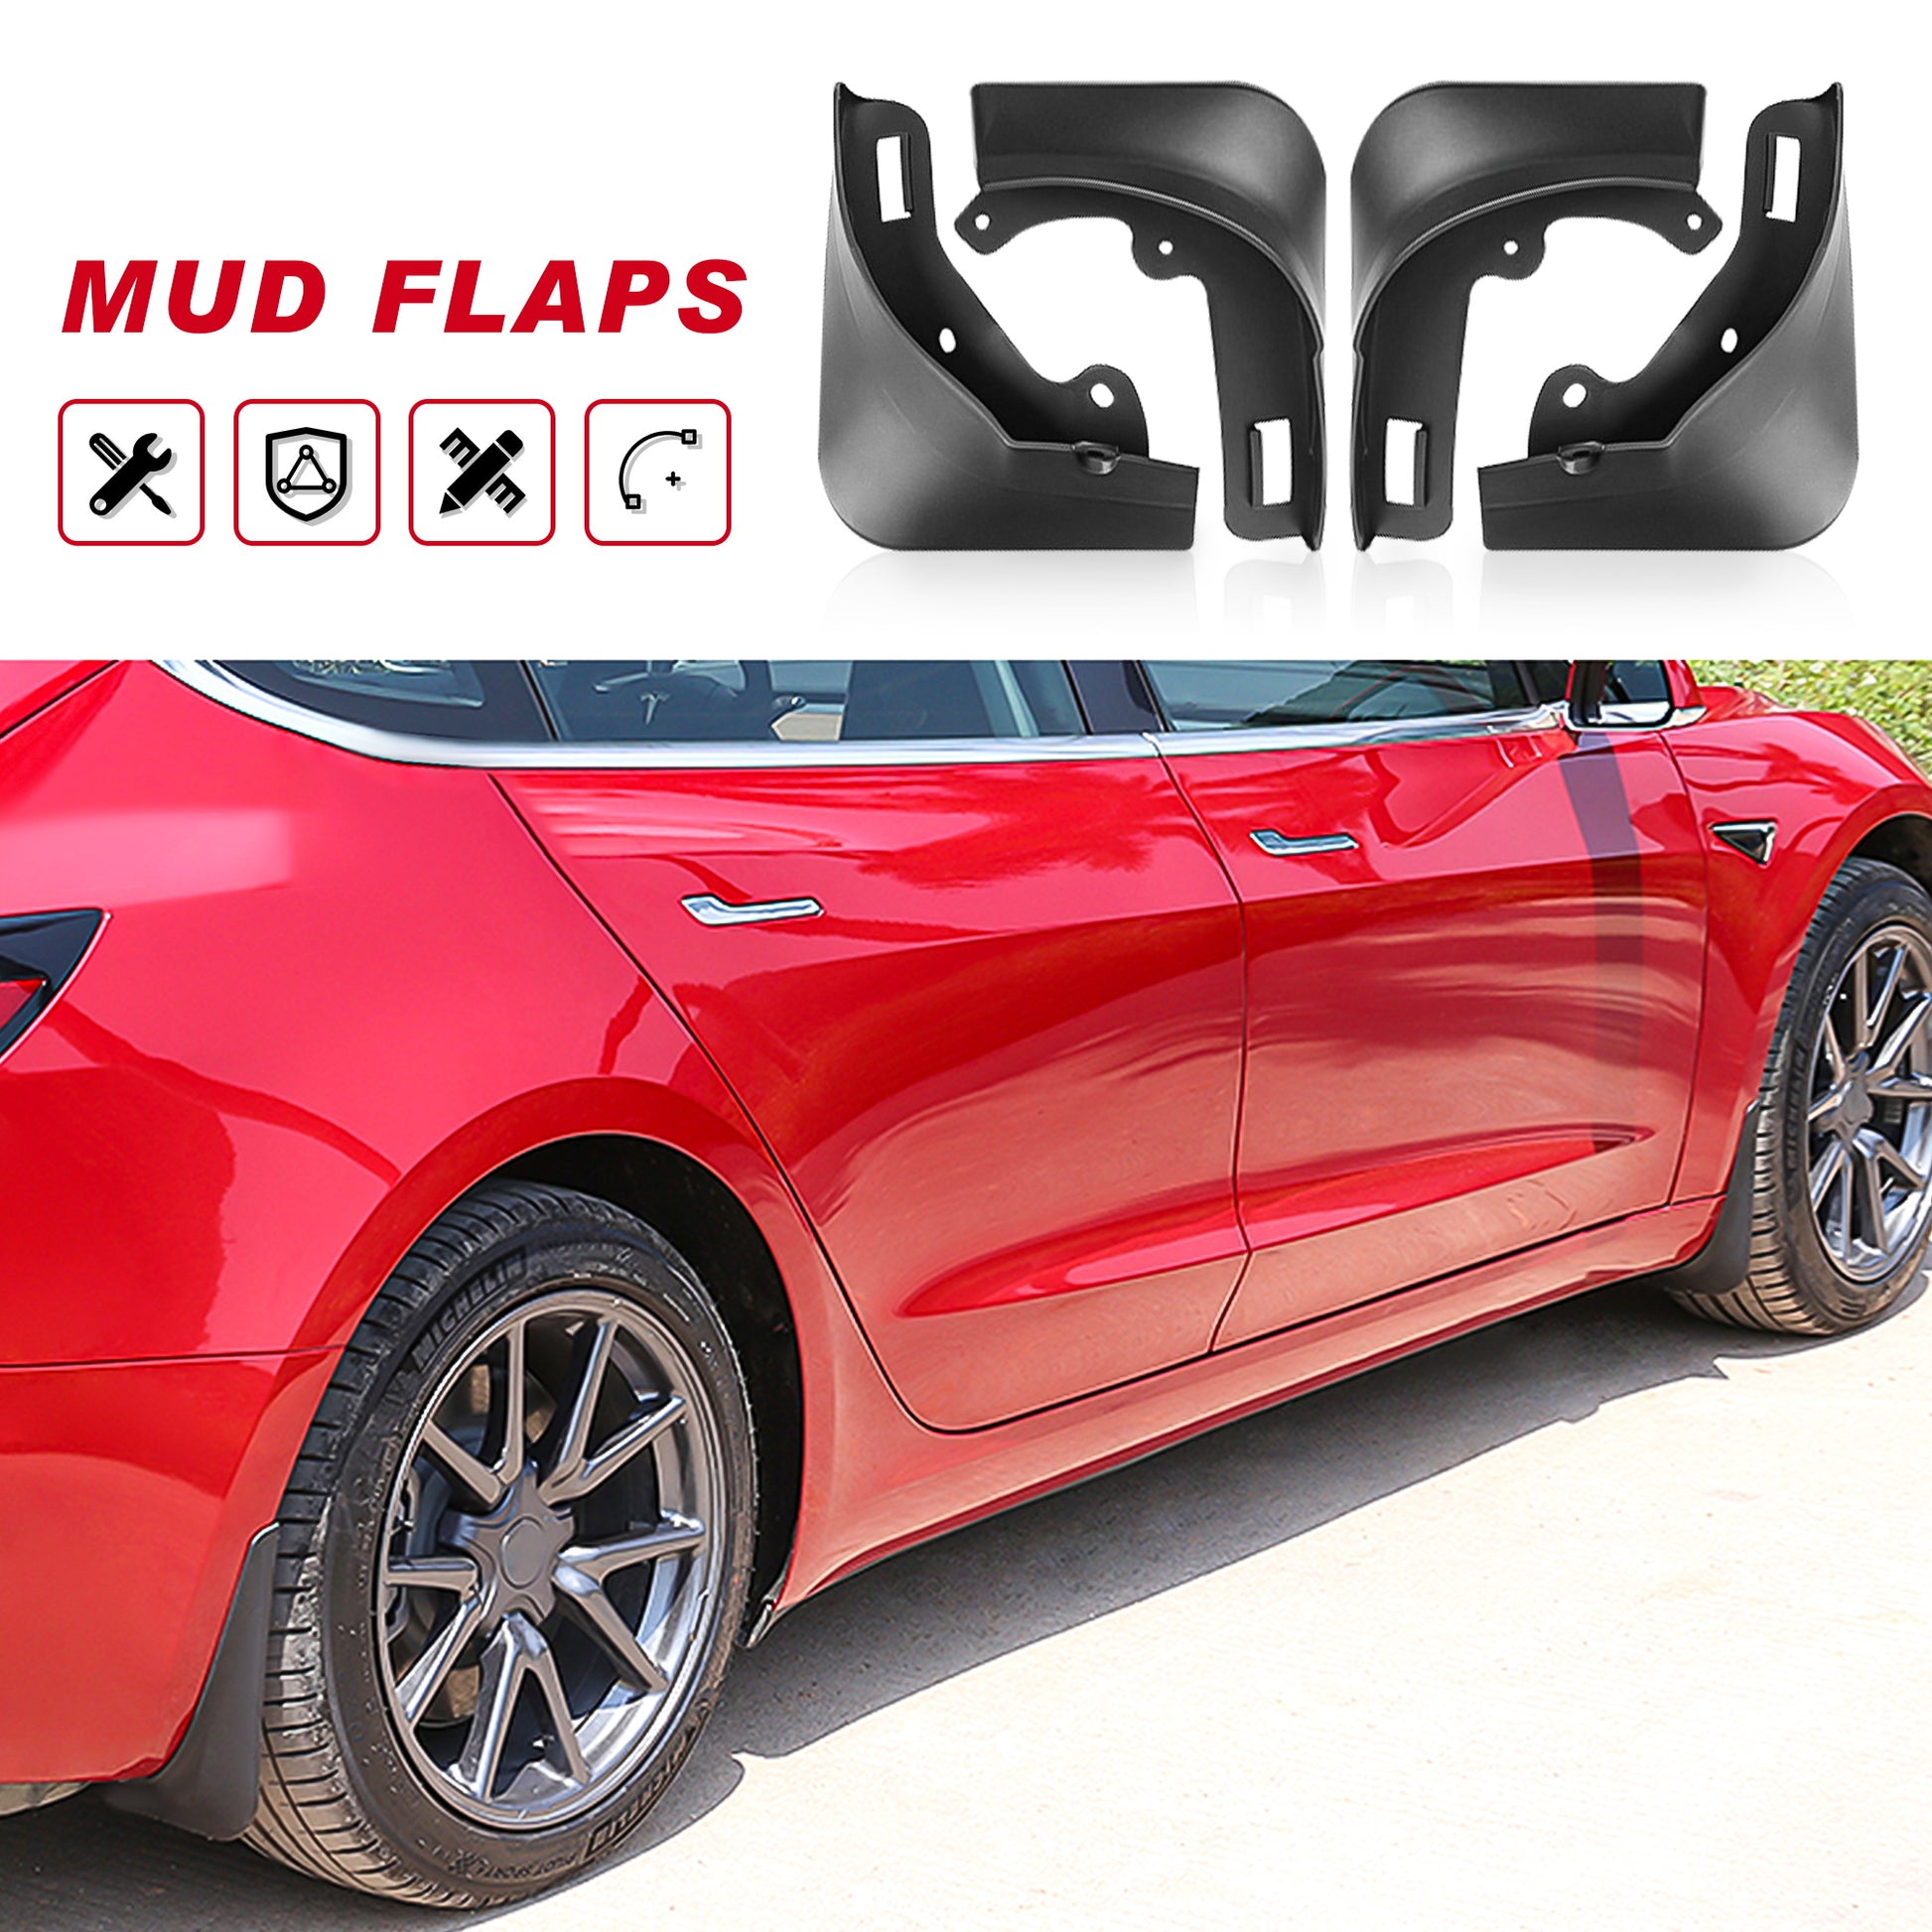 tesla model Y car mud flaps protection flap splash guards fender fenders no drill drilling 2022 2023 2021 2020 2019 2018 s3xy arcoche accessories accessory aftermarket price Vehicles standard long range performance sr+ electric car rwd ev interior exterior diy decoration price elon musk must have black white red blue